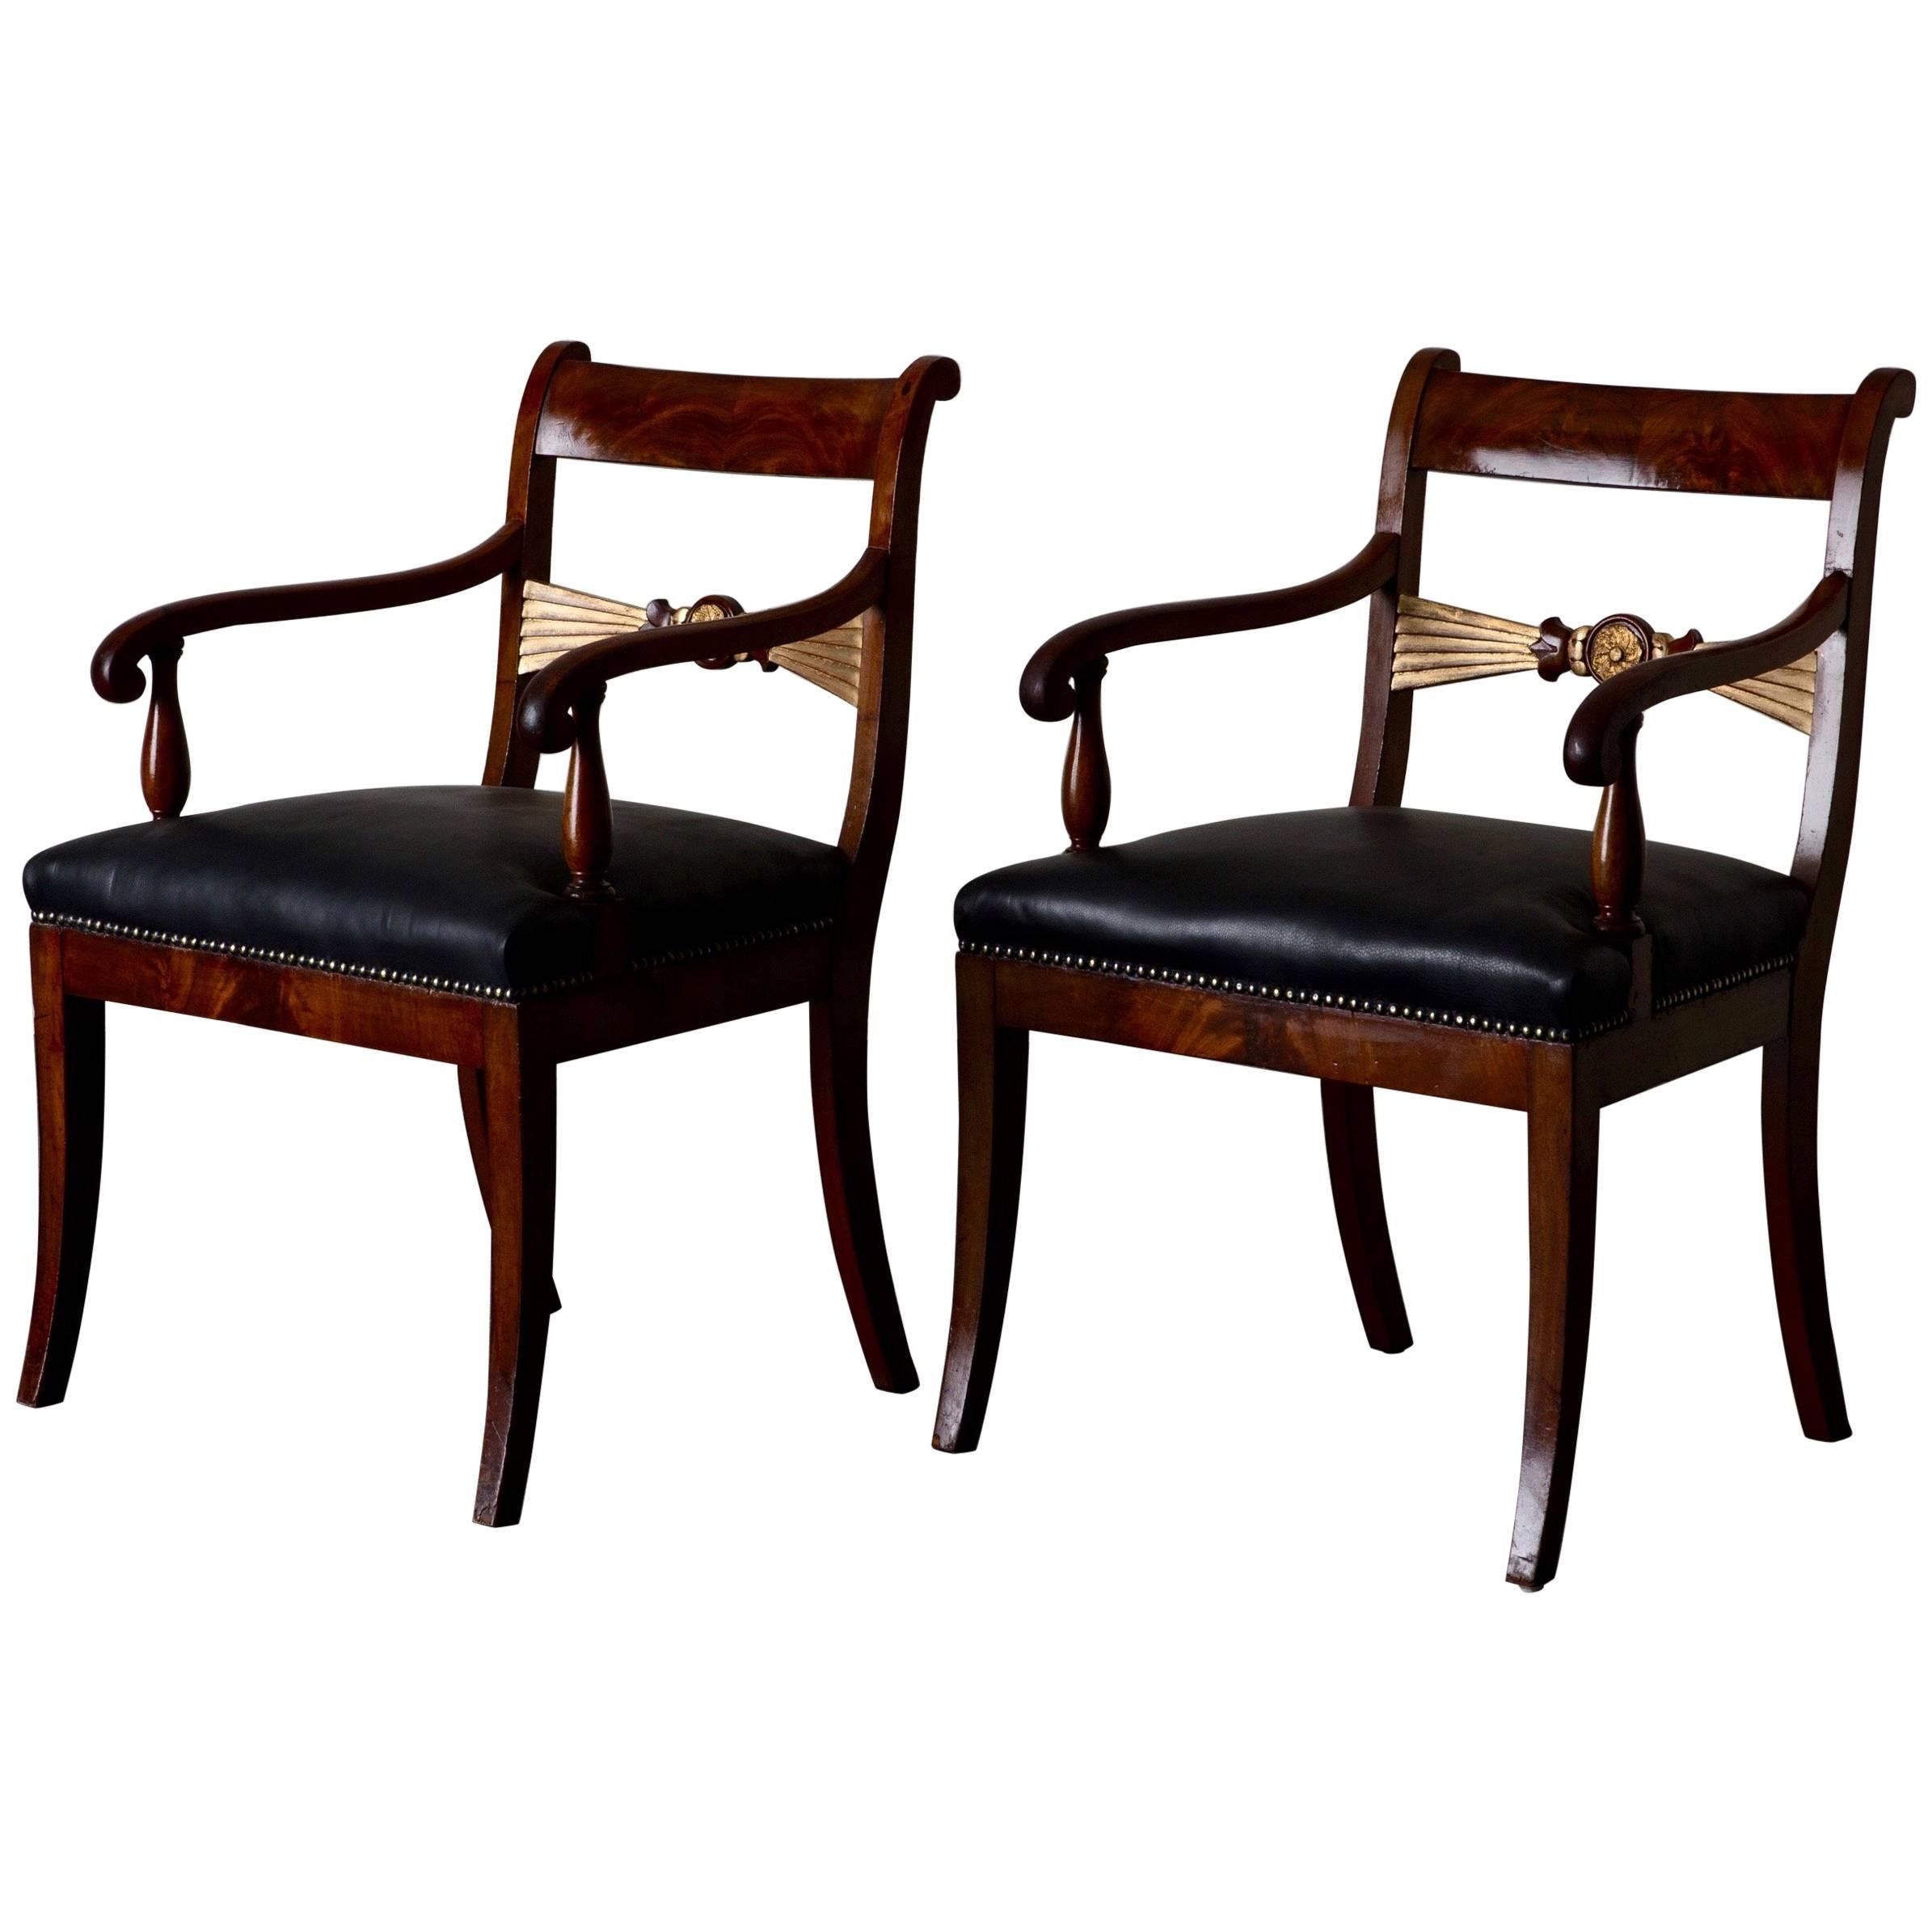 Pair of Mahogany Armchairs with Gilded Details, 19th Century, England